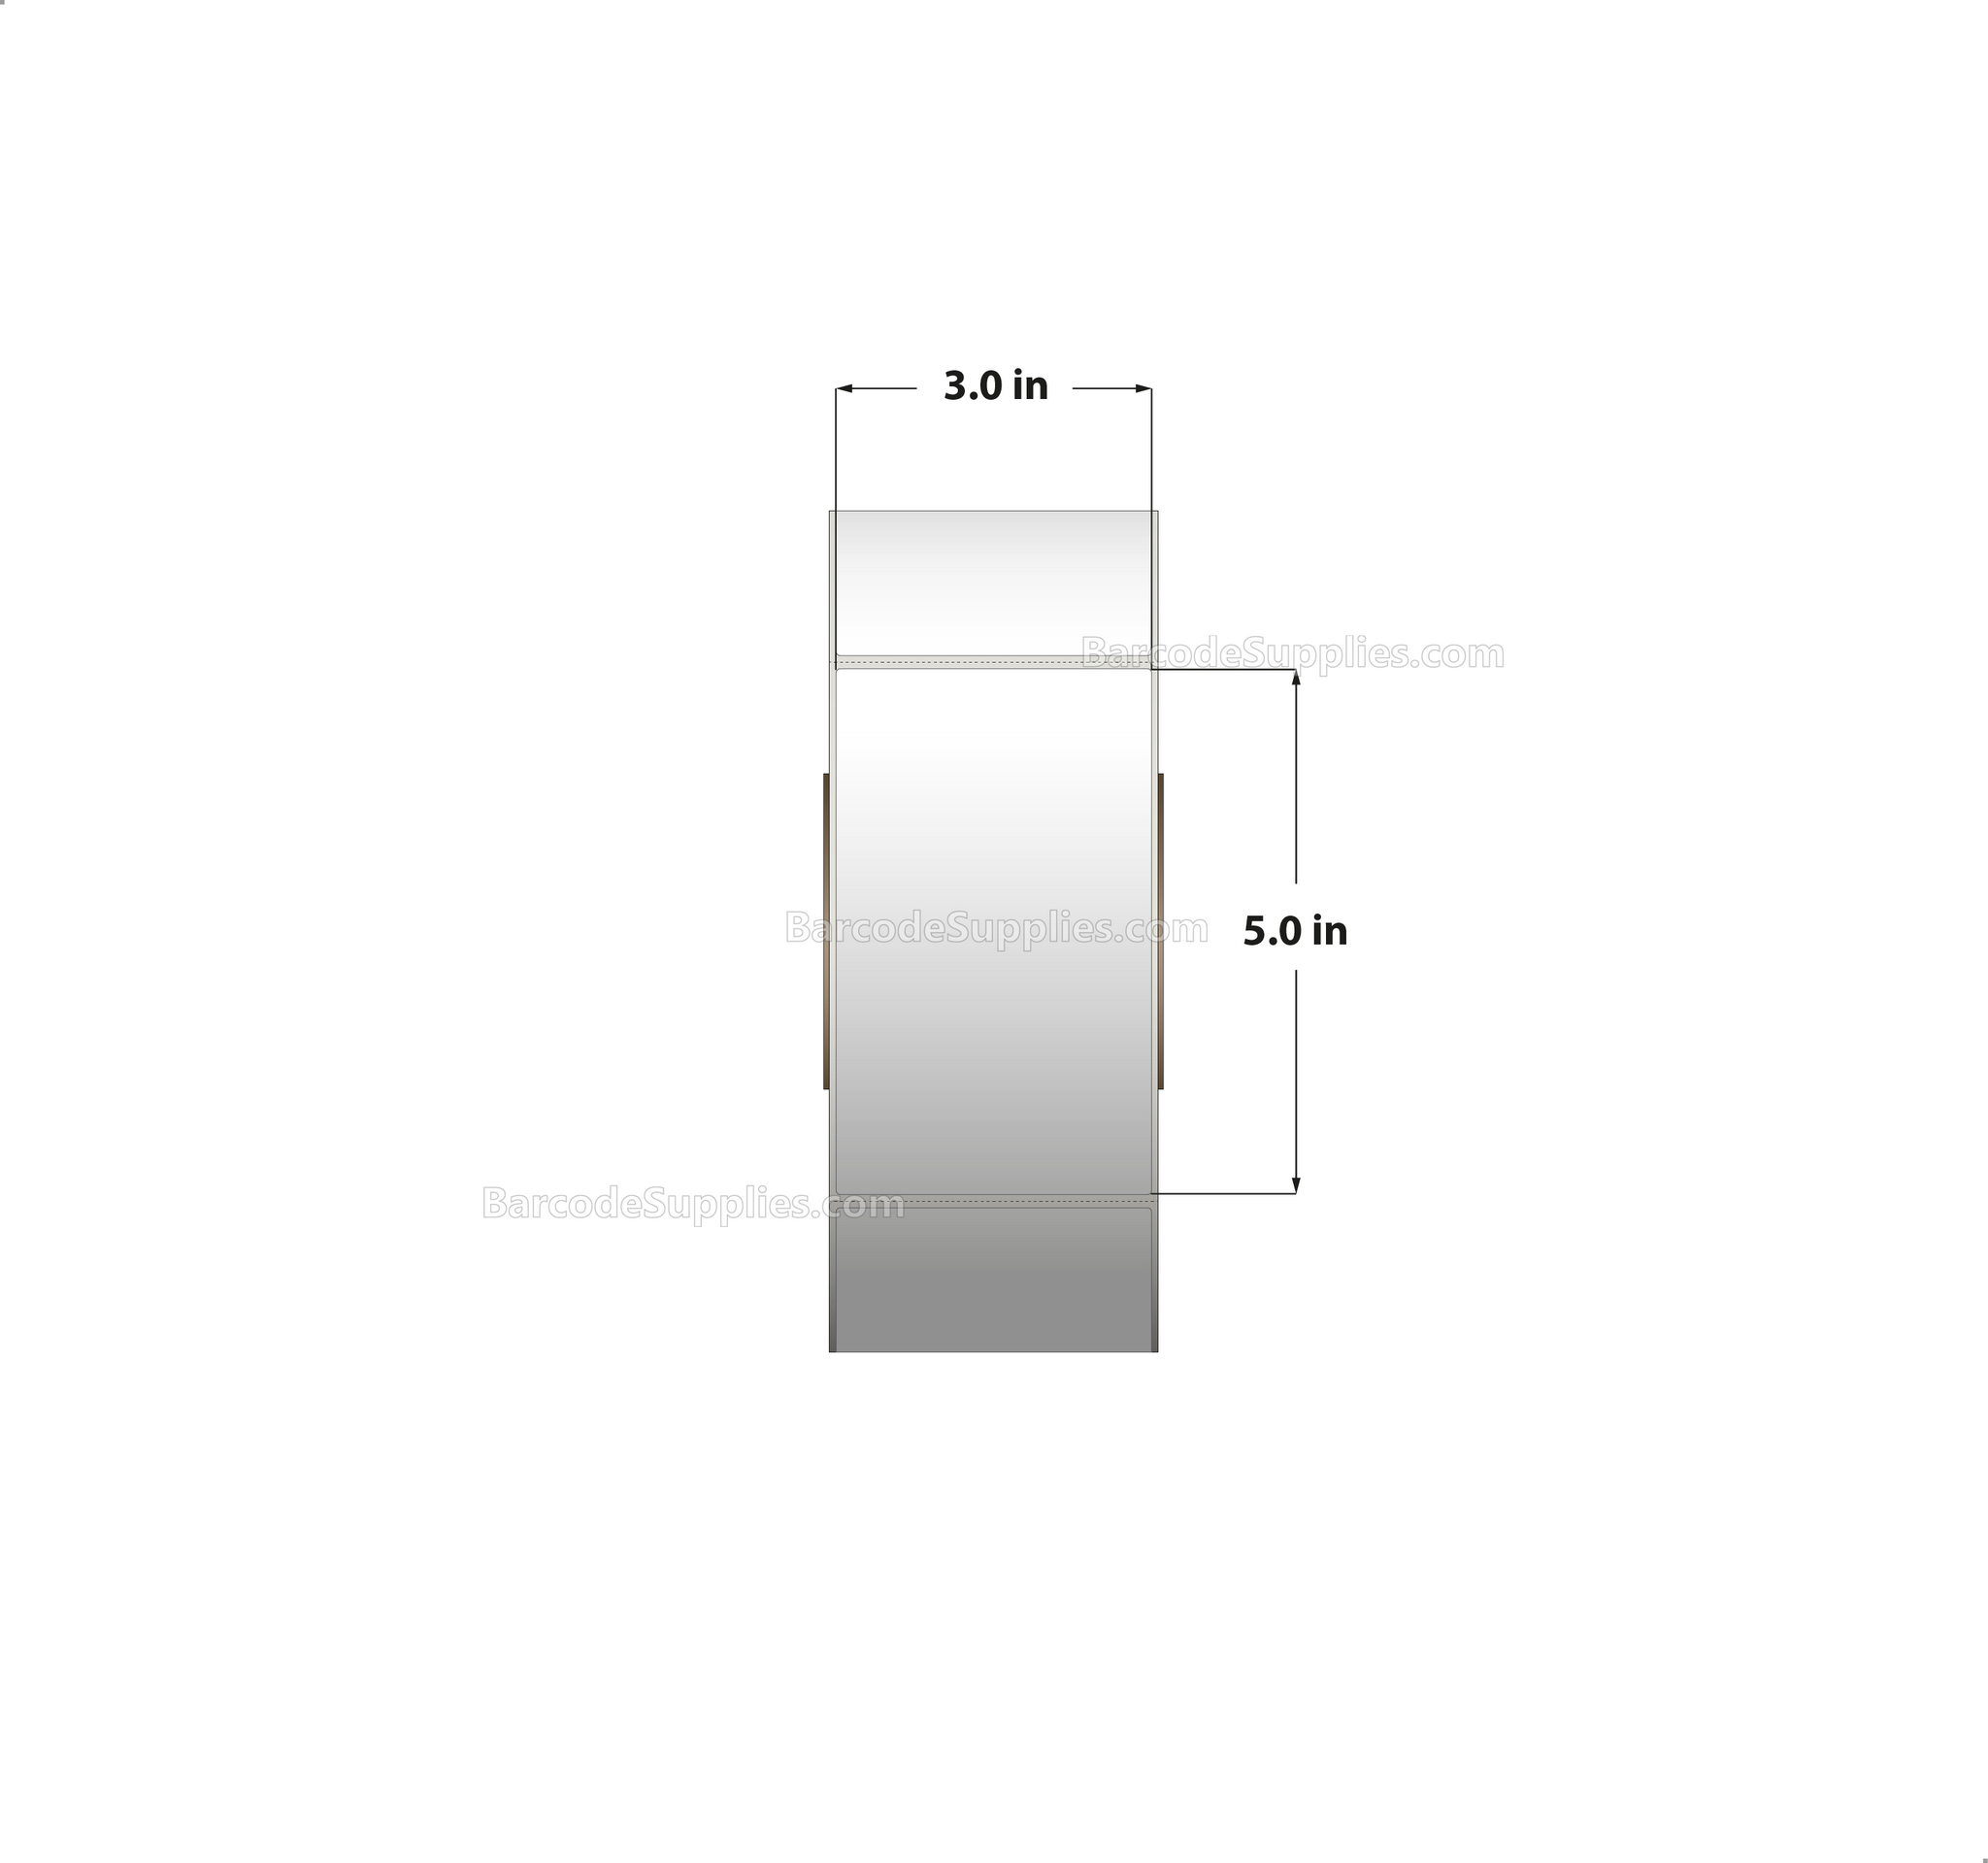 3 x 5 Thermal Transfer White Labels With Permanent Acrylic Adhesive - Perforated - 1250 Labels Per Roll - Carton Of 6 Rolls - 7500 Labels Total - MPN: TH35-1P